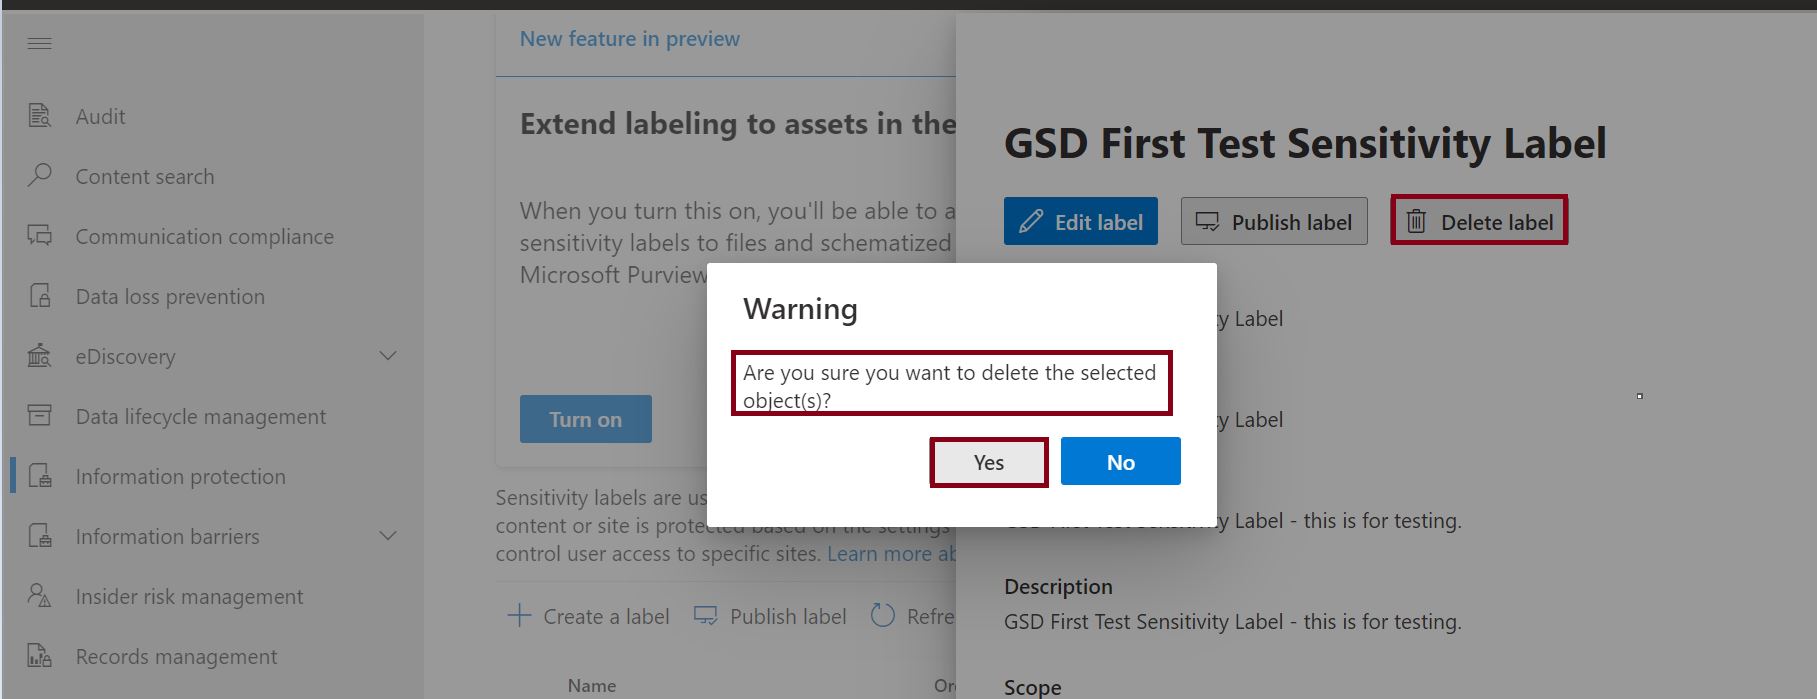 Are you sure you want to delete the selected object(s) - sensitivity label